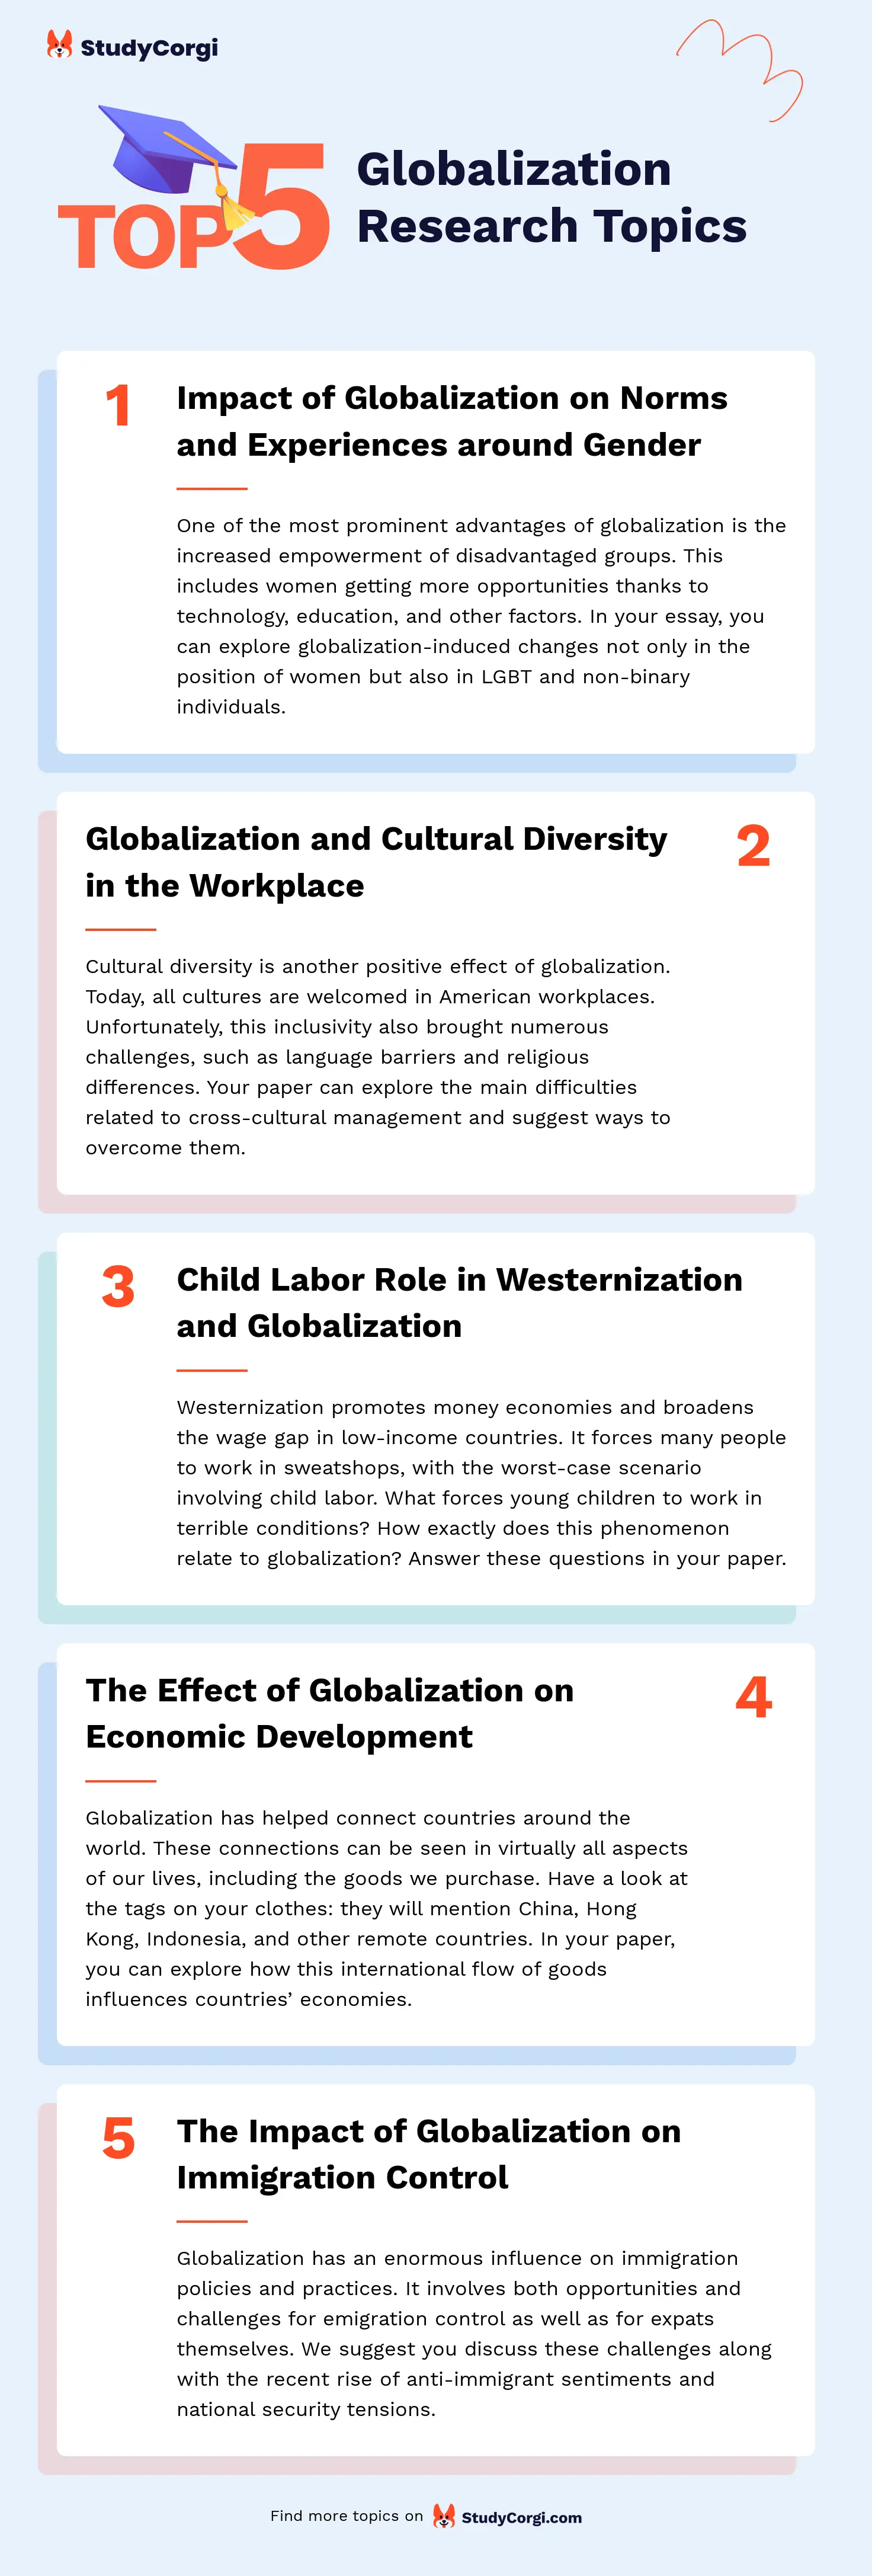 TOP-5 Globalization Research Topics